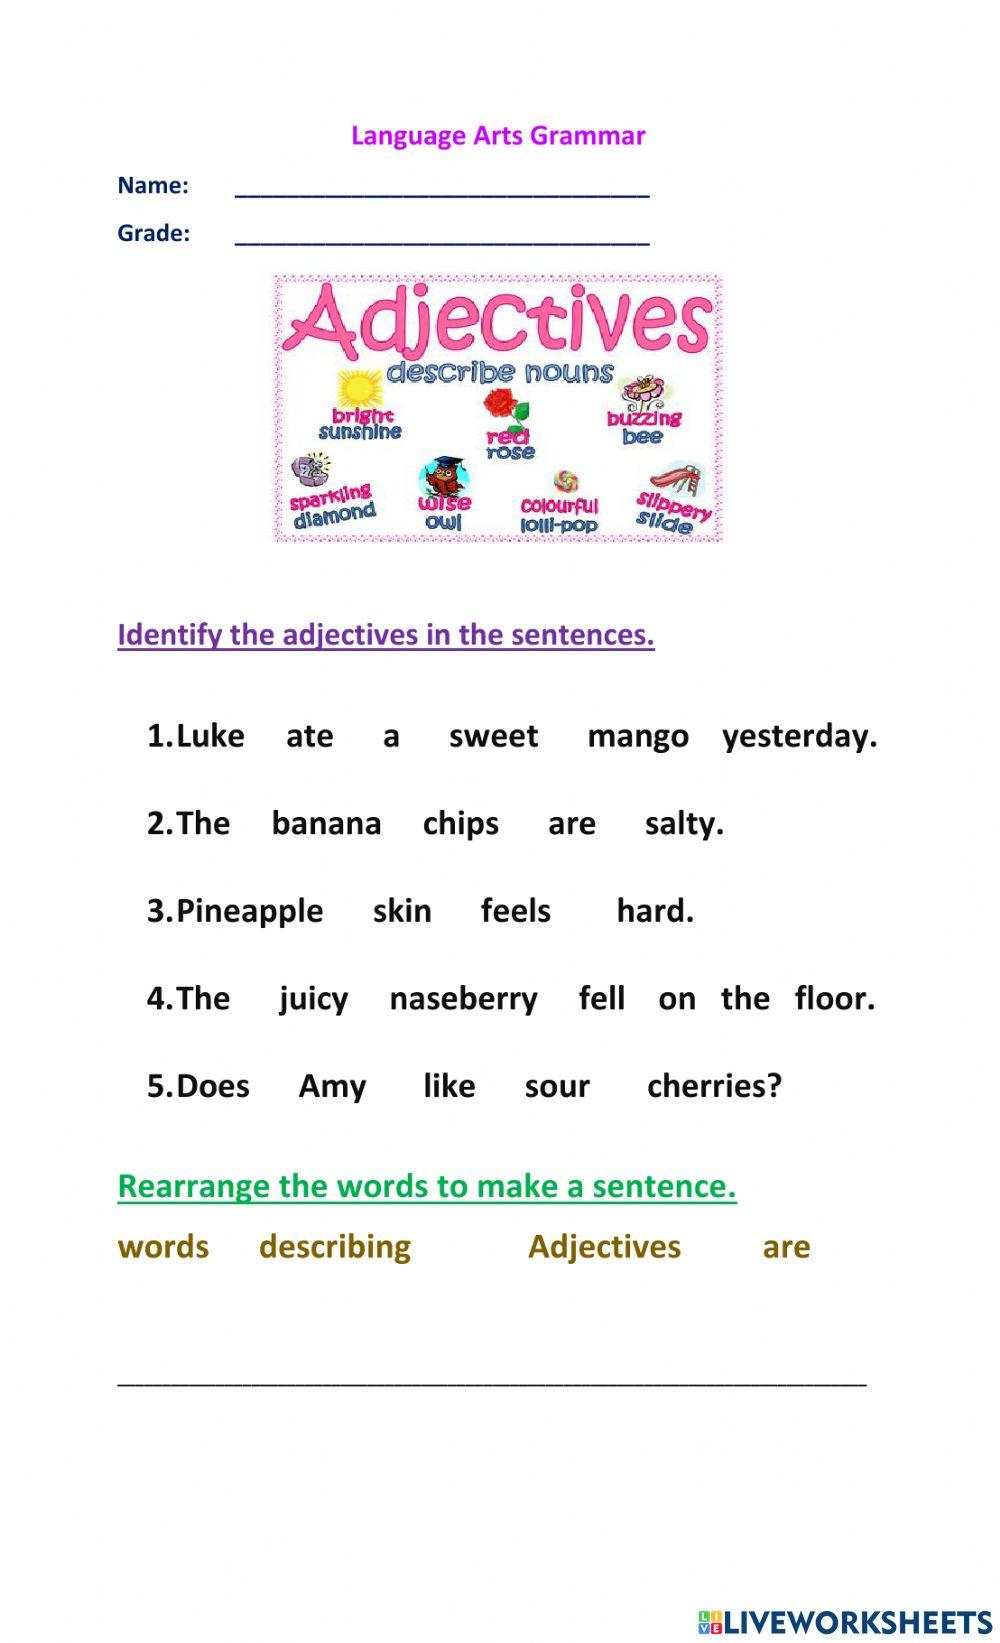 Adjectives and our senses